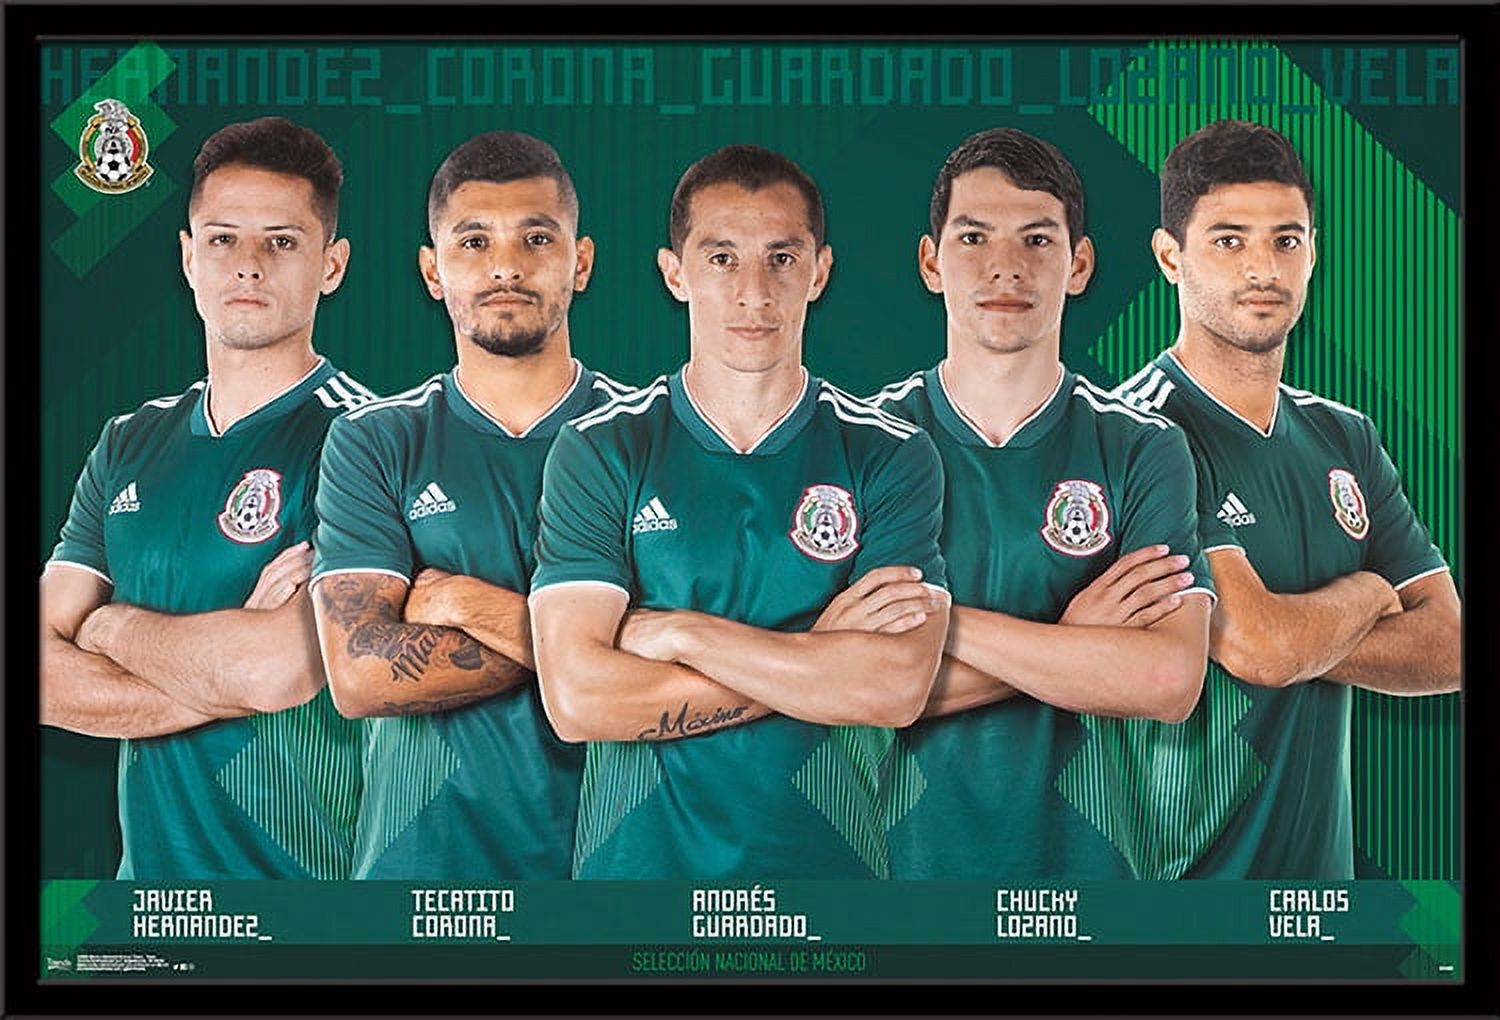 Mexico National Soccer Team - Team - image 1 of 2